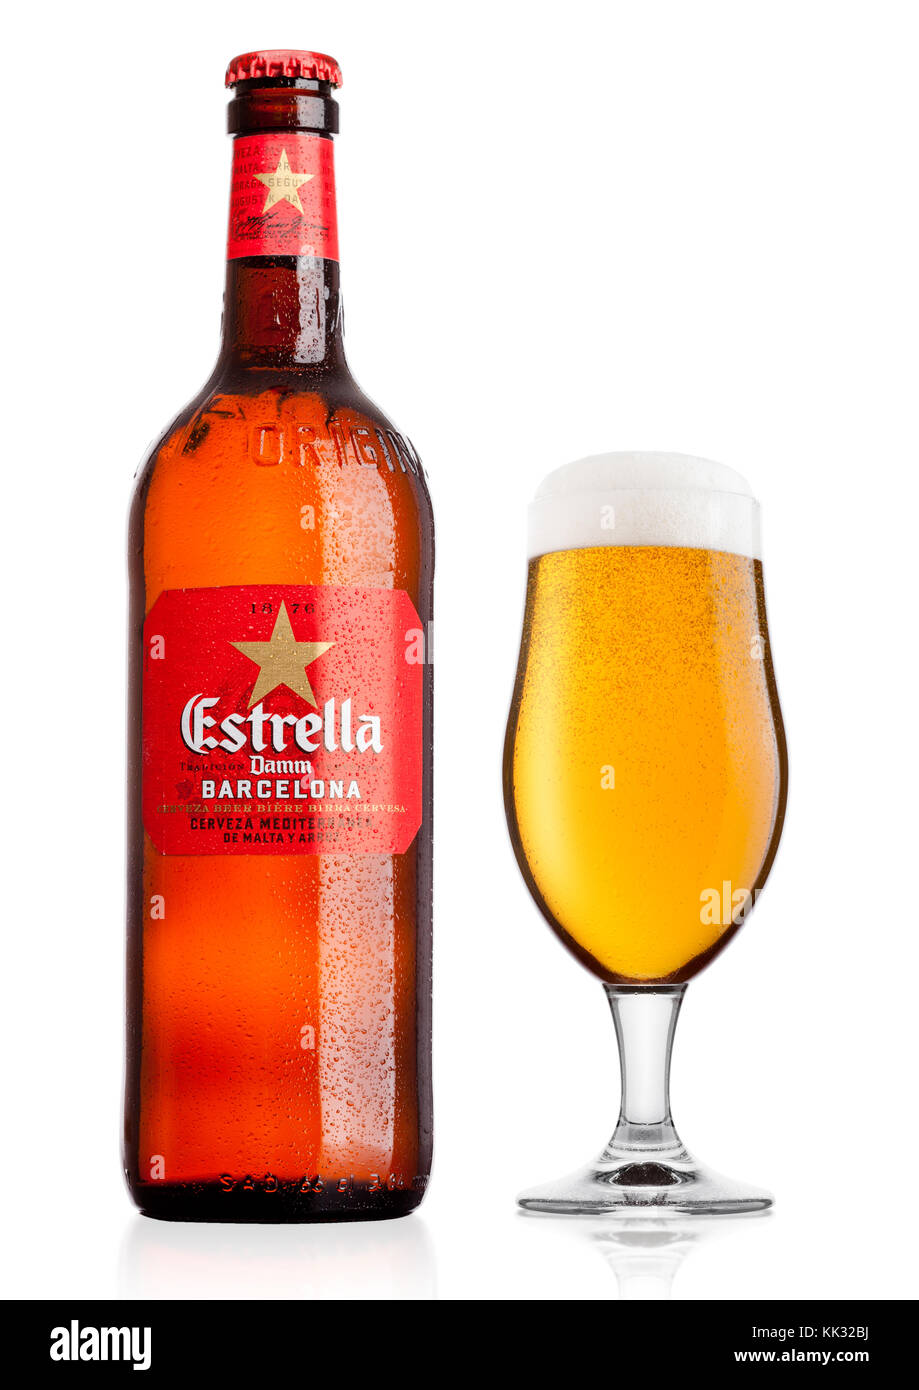 LONDON, UK - November 24, 2017: Bottle and glass of Estrella Damm beer on white background with reflection, Estrella Damm is a pilsner beer, brewed in Stock Photo